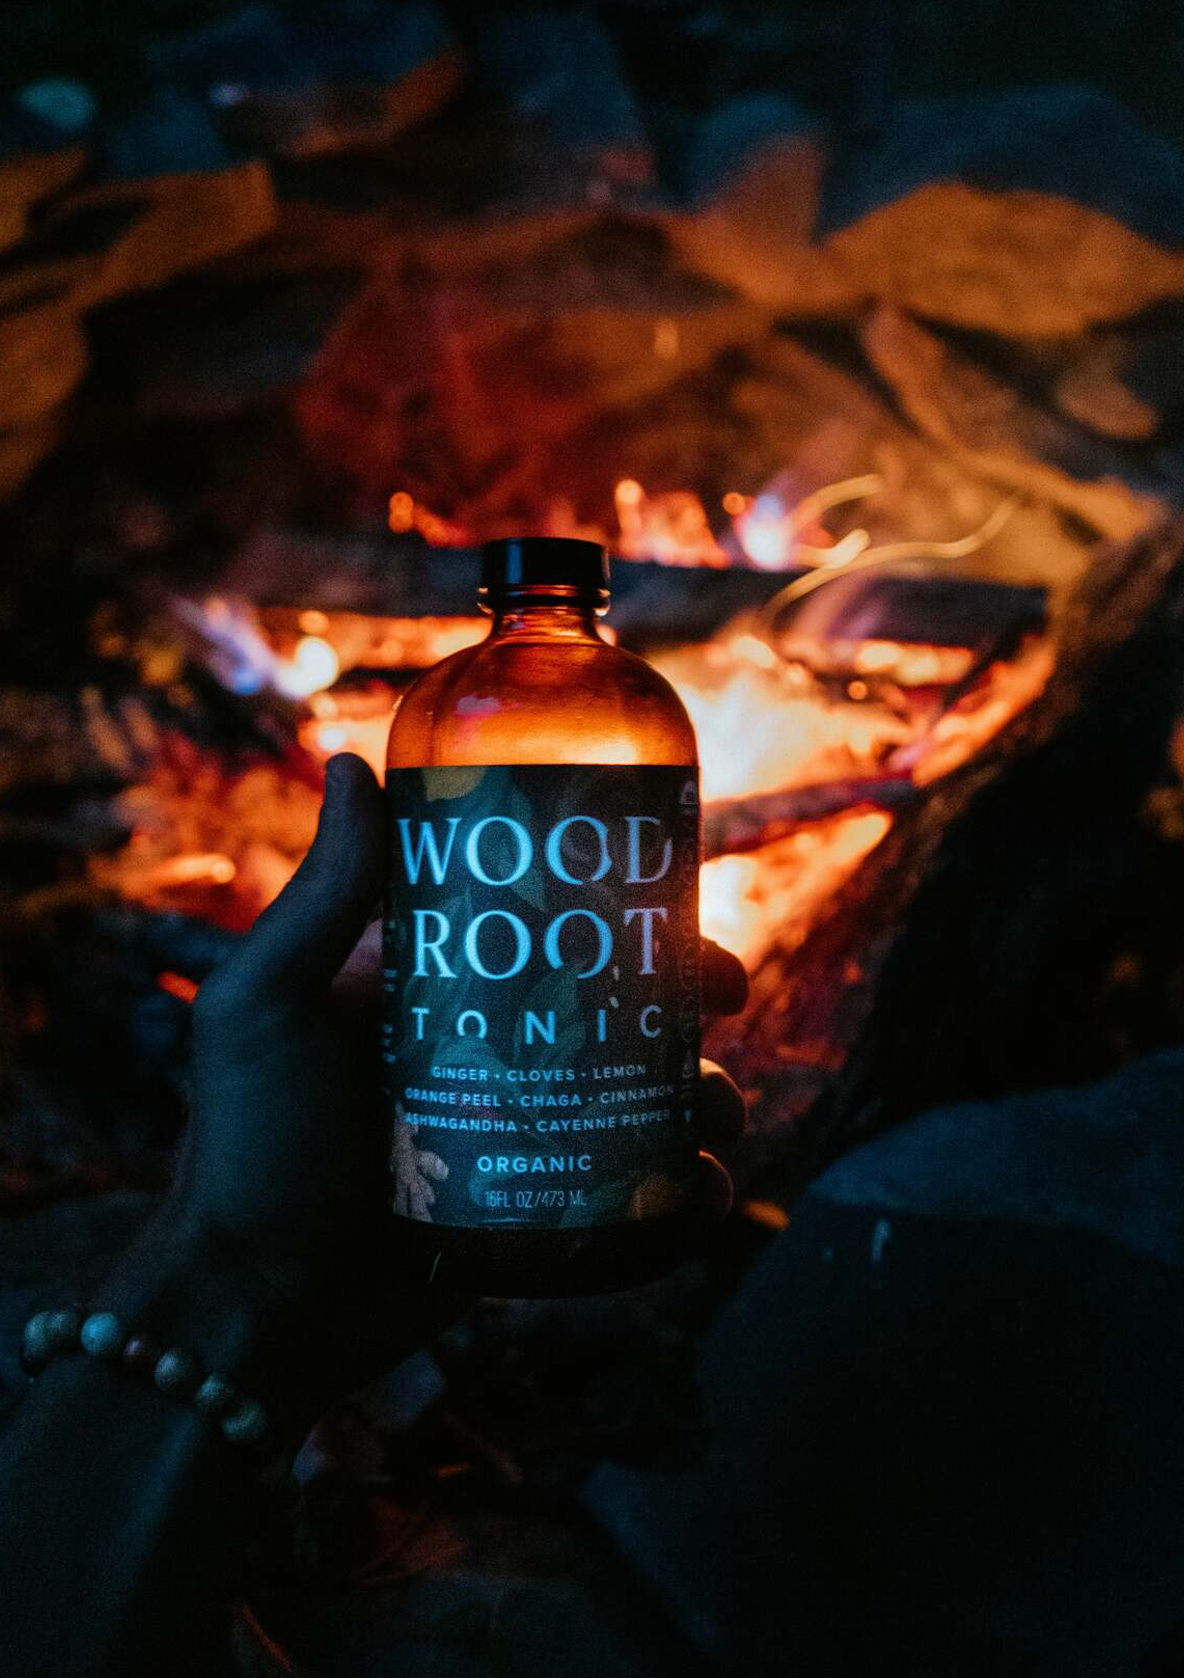 Bottle of Woodroot Tonic next to fire.